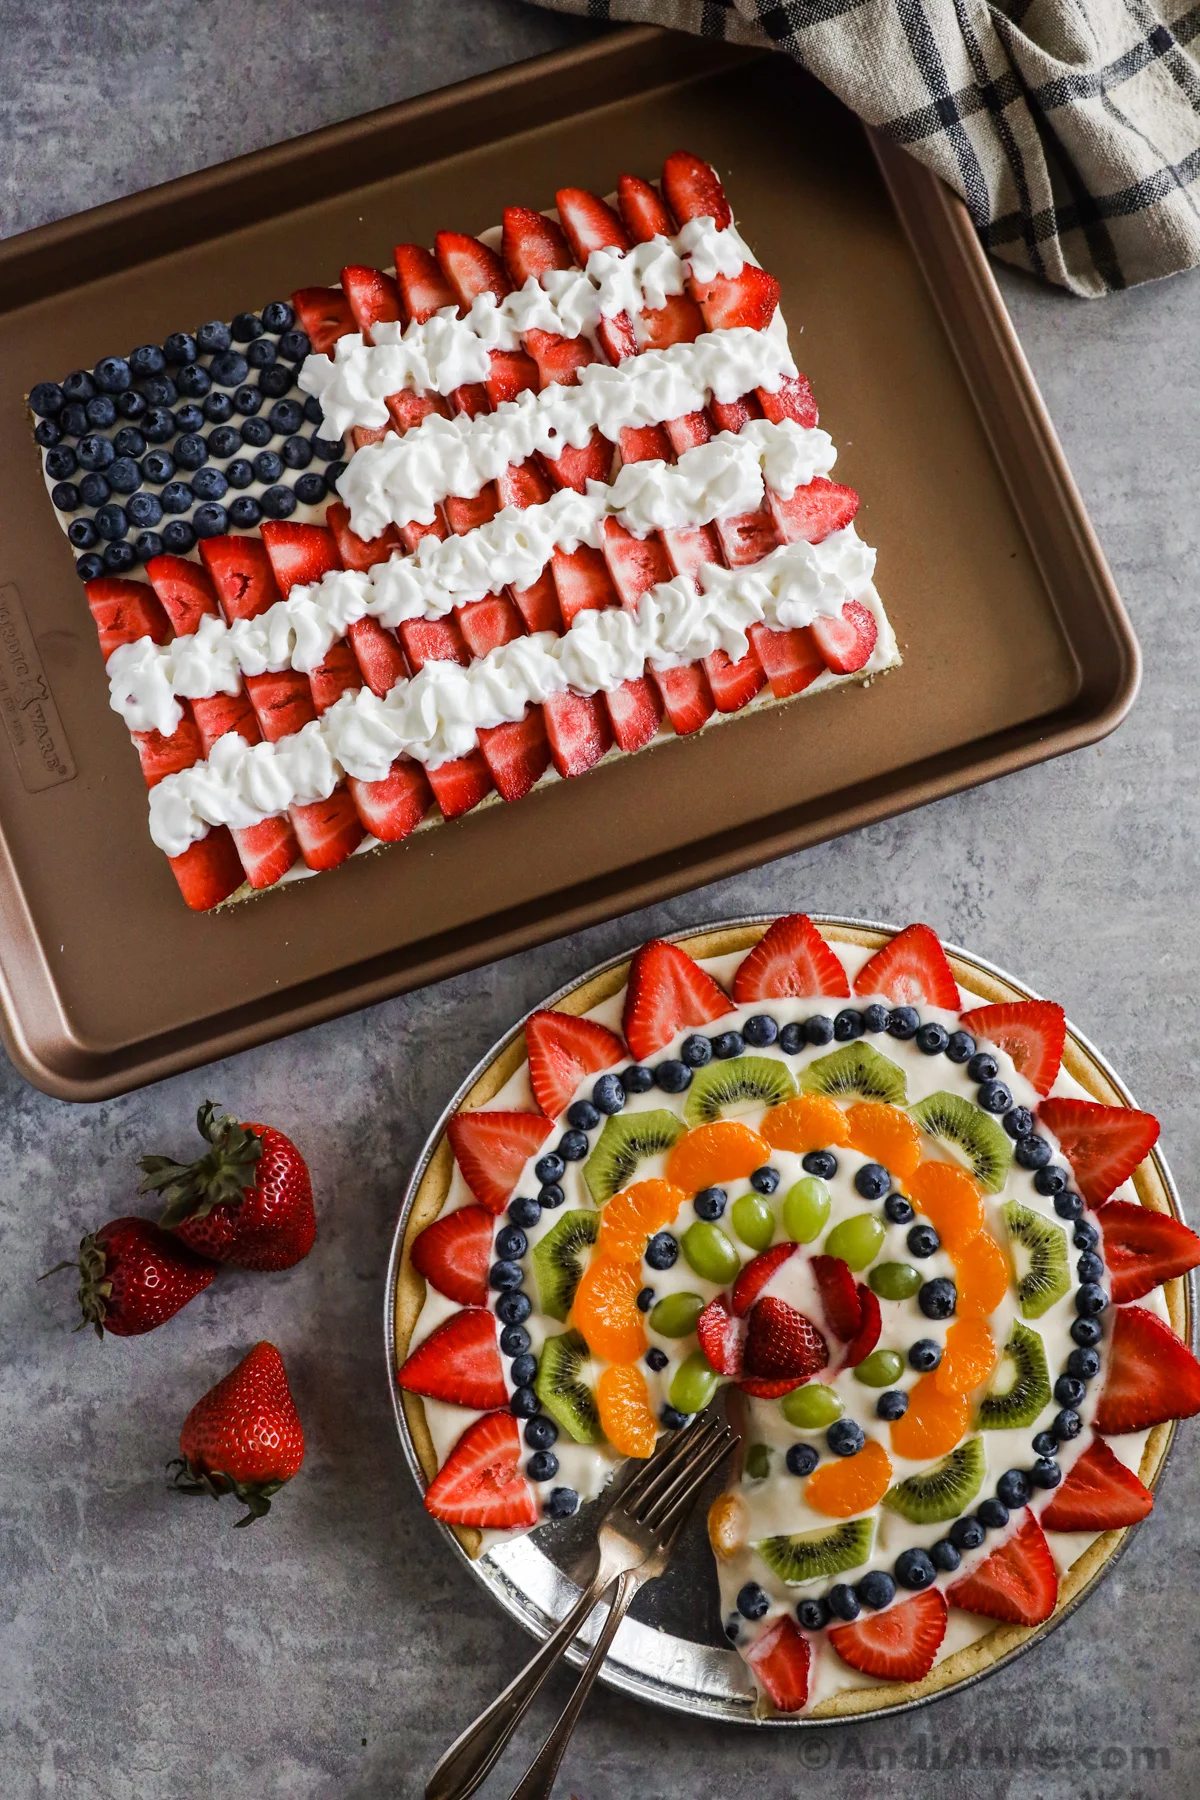 two fruit pizzas, one in the shape of a an American flag, the other in a round shape with colorful fruits and a slice cut out.